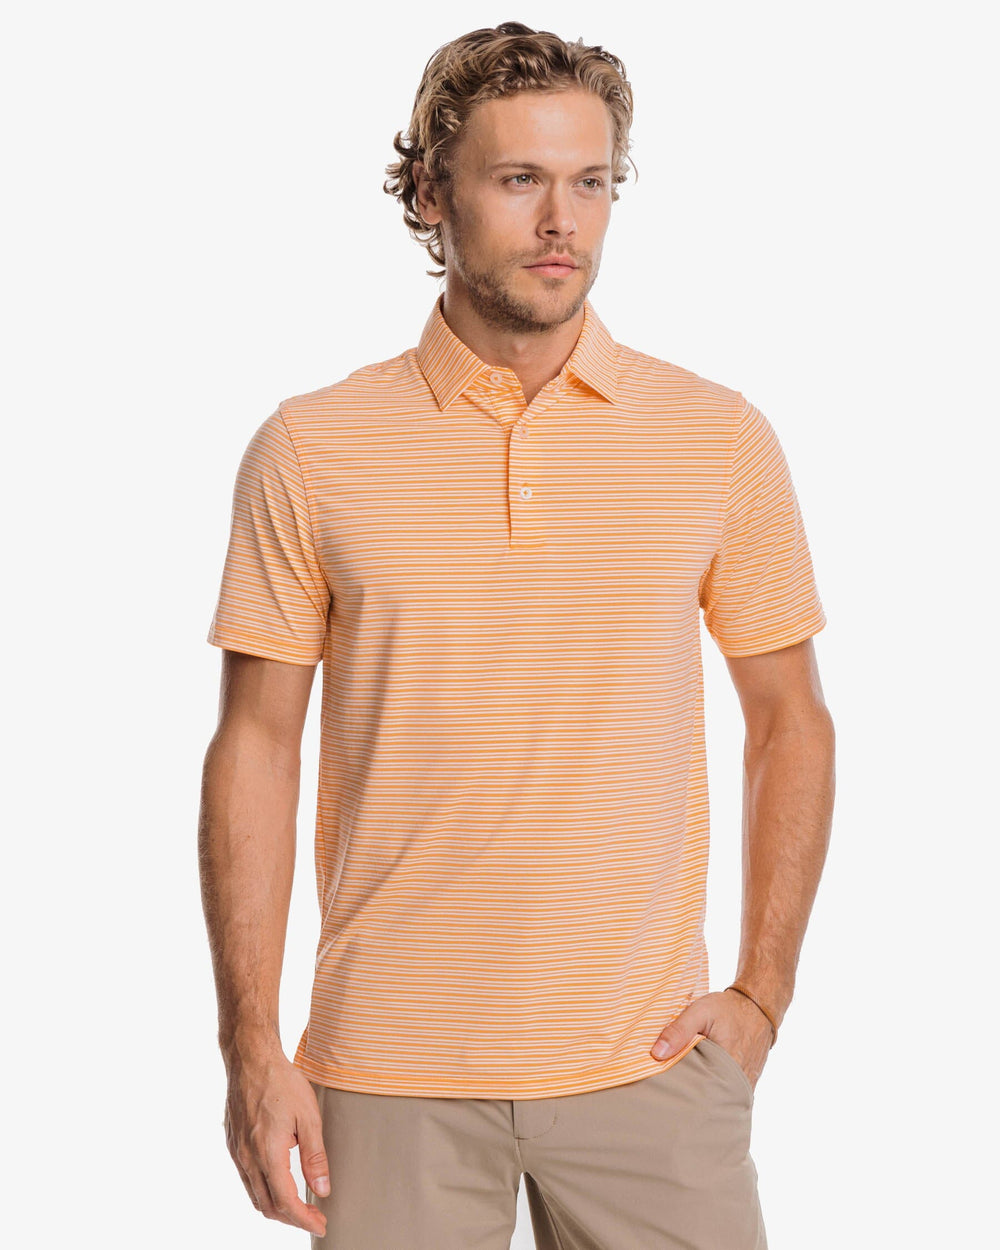 The front view of the Southern Tide brrr-eeze Millwood Stripe Performance Polo Shirt by Southern Tide - Horizon